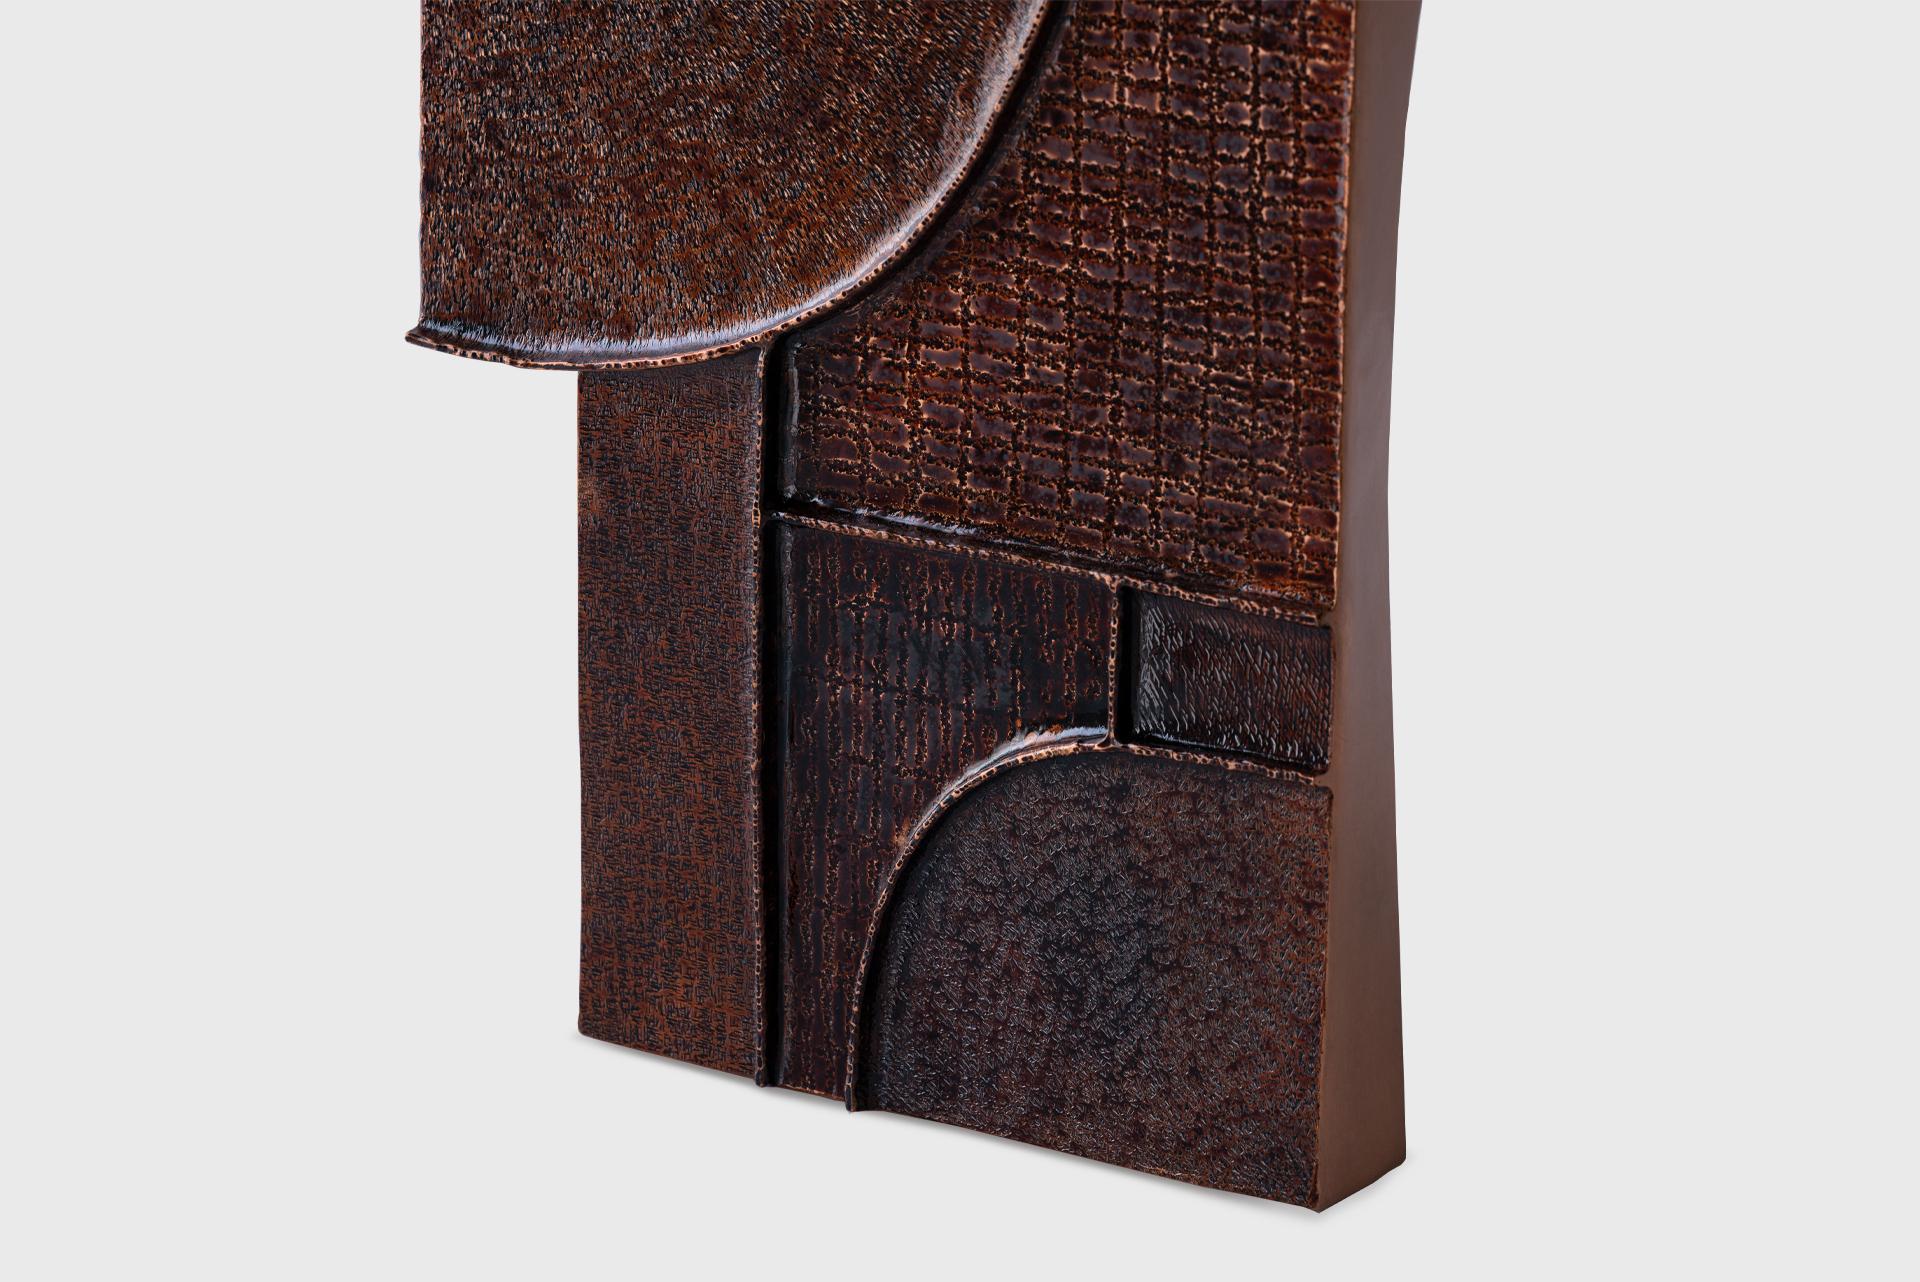 Copper Contemporary Wall Object 2, Textured Natural Dark Lacquer, Seung Hyun Lee, Korea For Sale